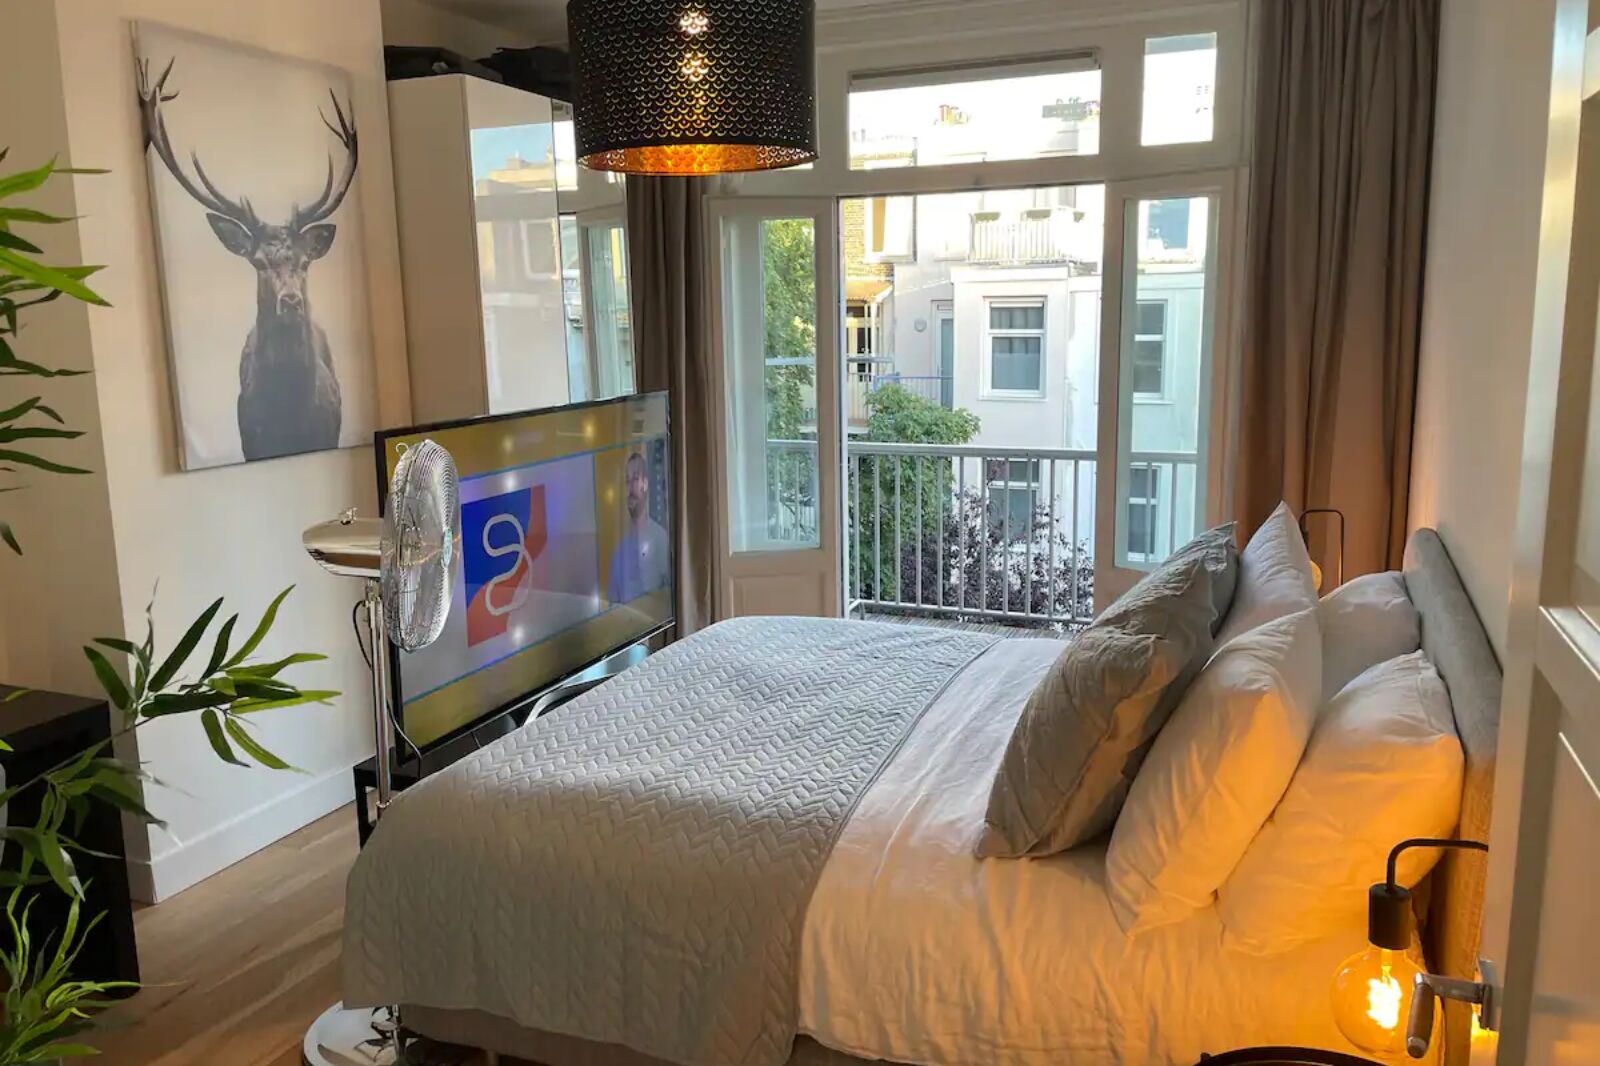 Bedroom with tv in one of the best amsterdam airbnbs for a bachelor party